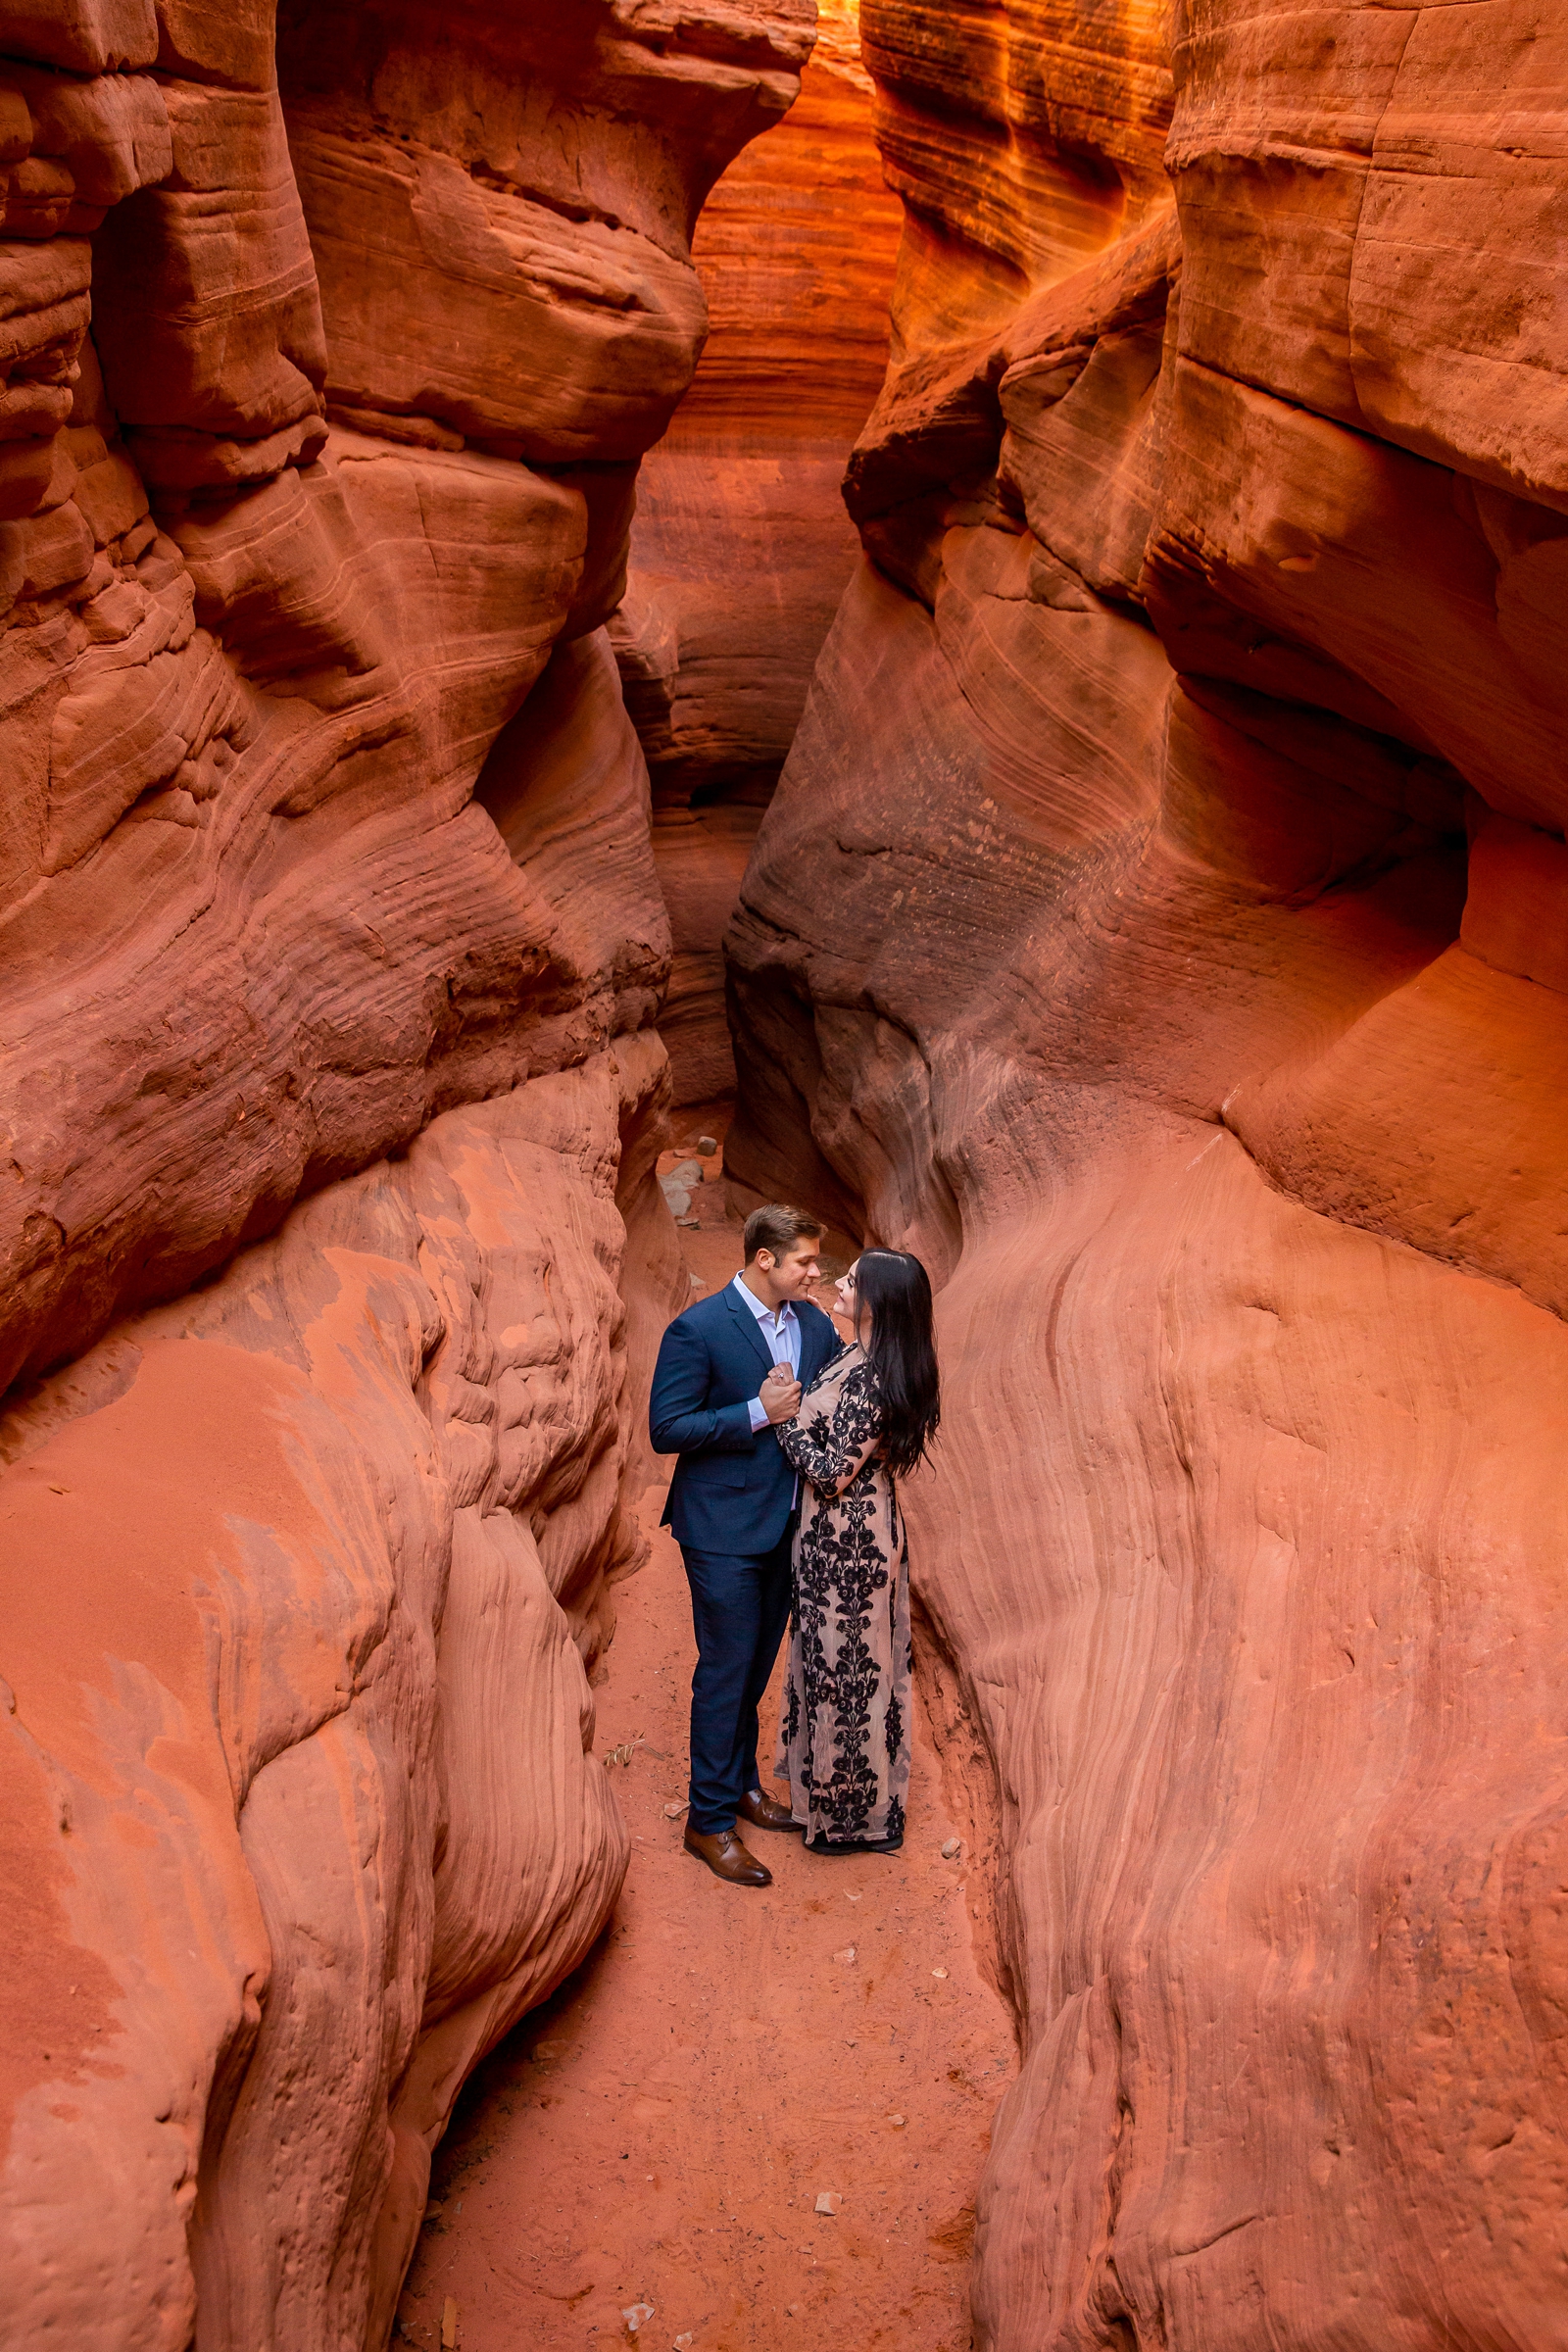 This couple had their engagement photos in a red rock slot canyon.